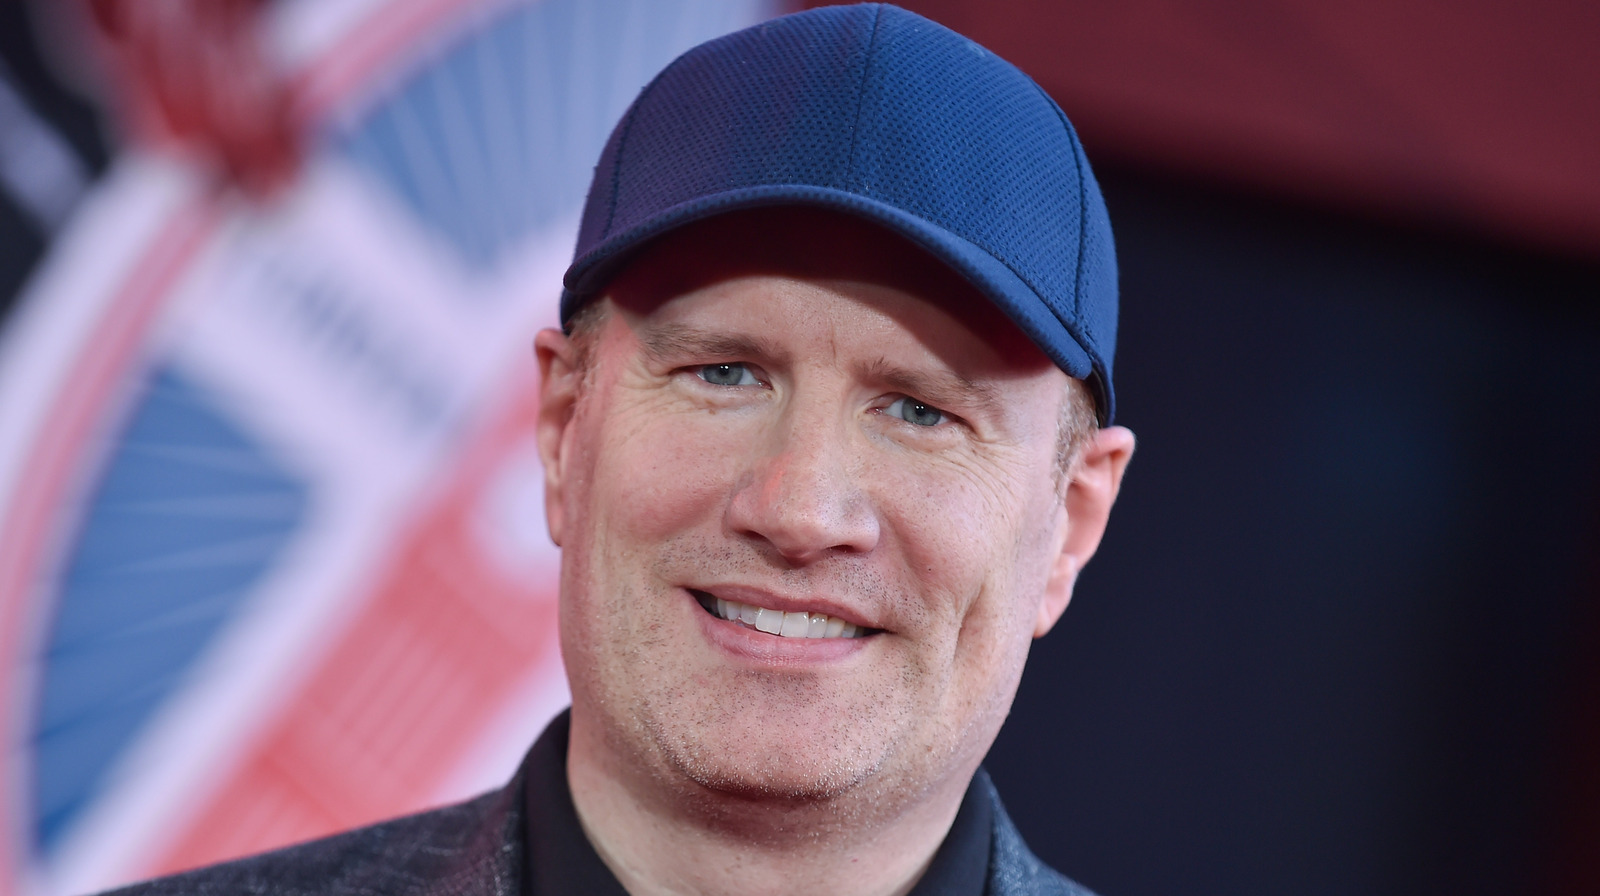 Kevin Feige Has Some Intriguing Remarks About Scarlett Johansson And The MCU